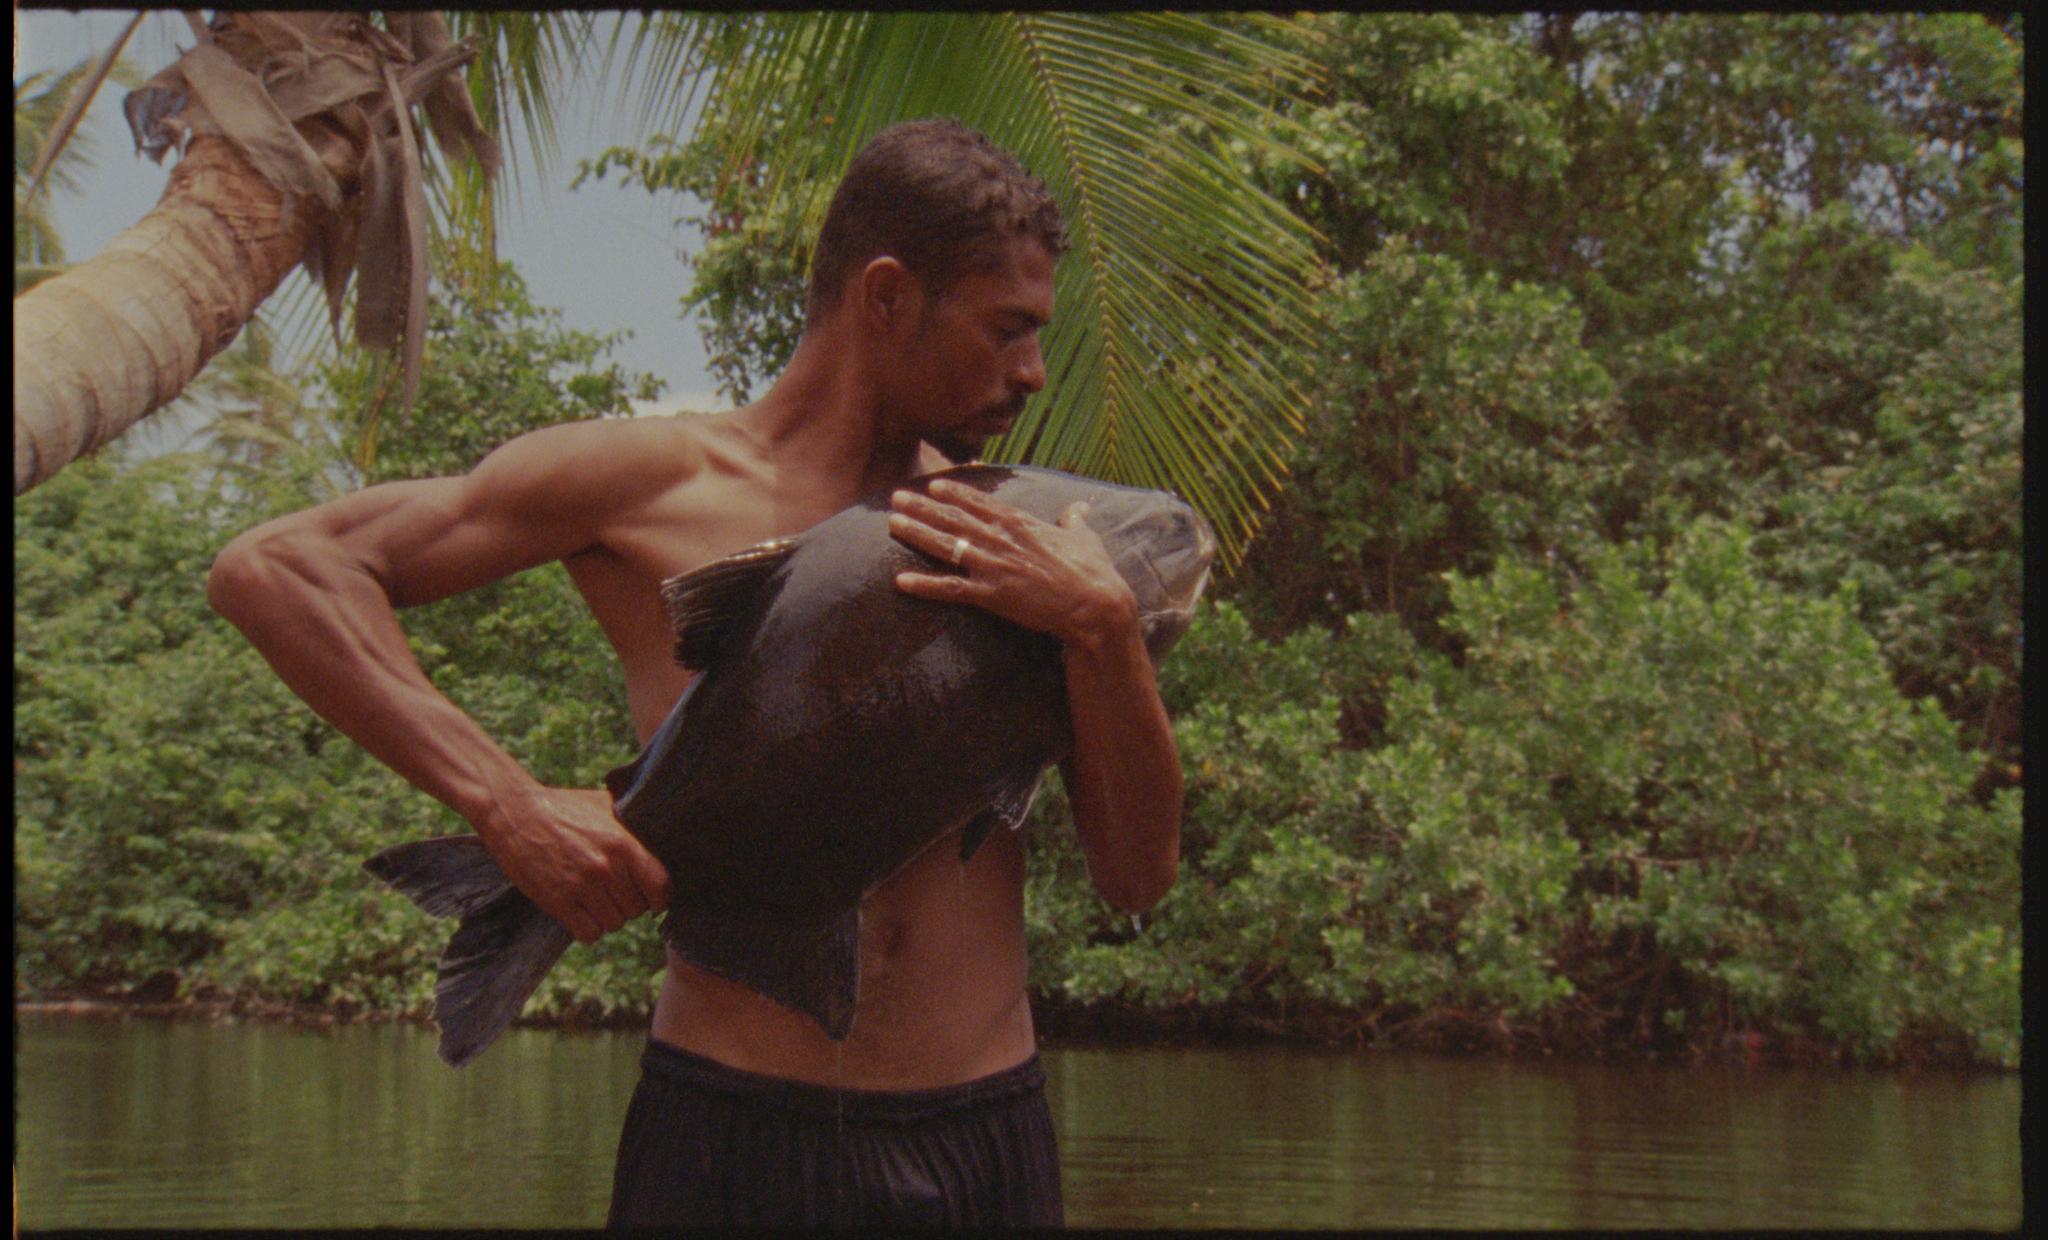 A shirtless person gently holds a fish against their body next to a river.